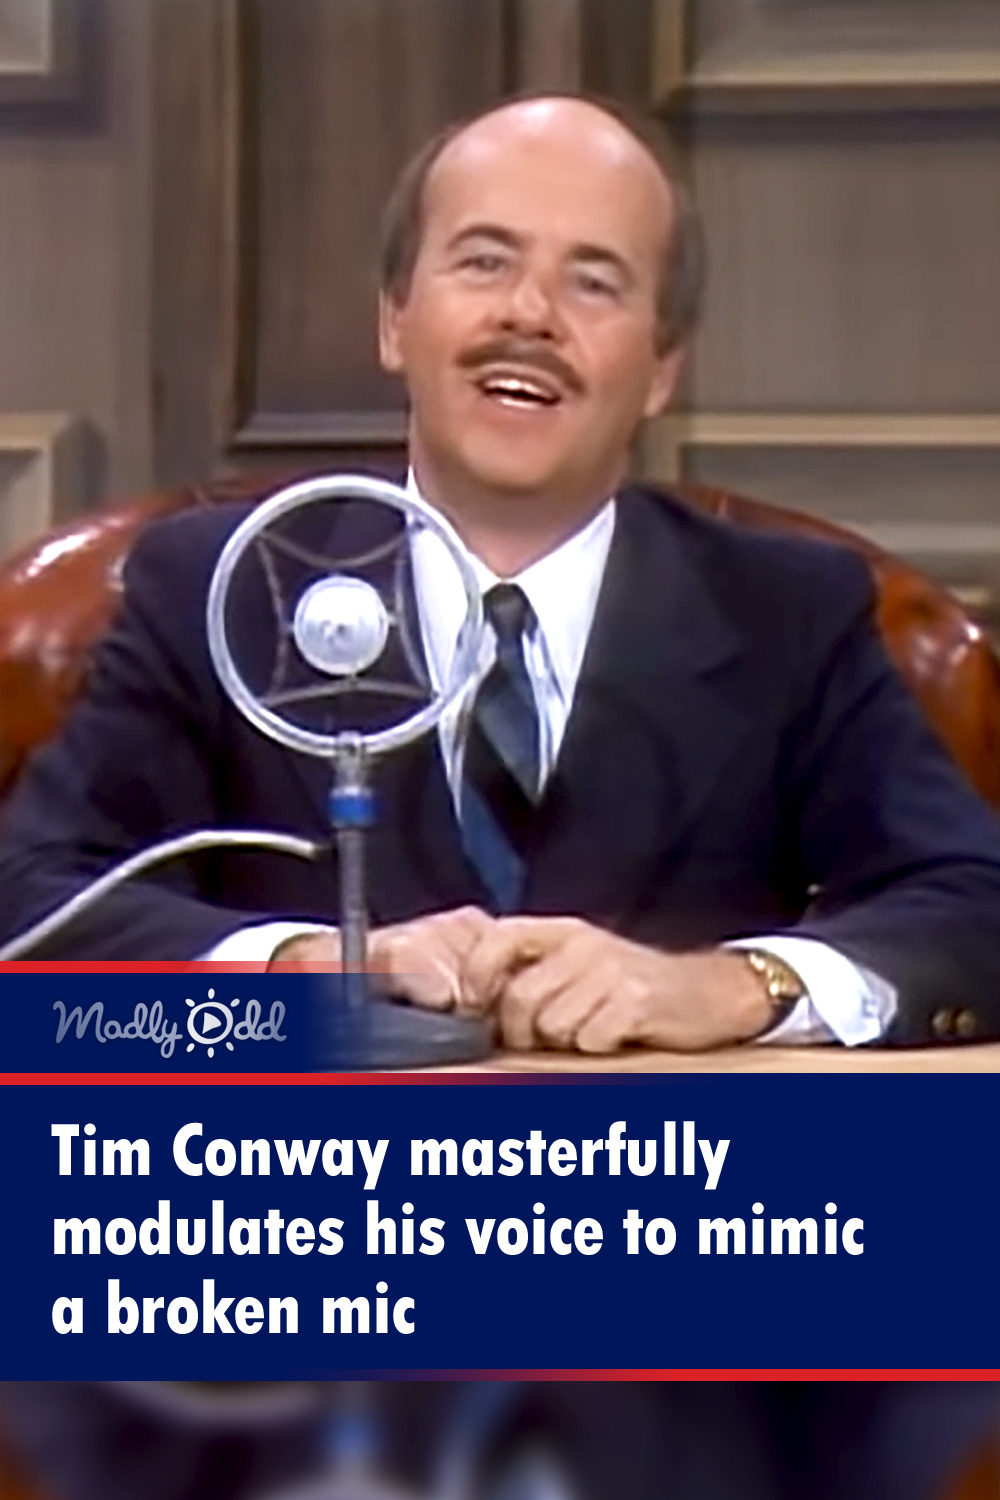 Tim Conway gives a news report with a broken microphone on ‘Carol Burnett’